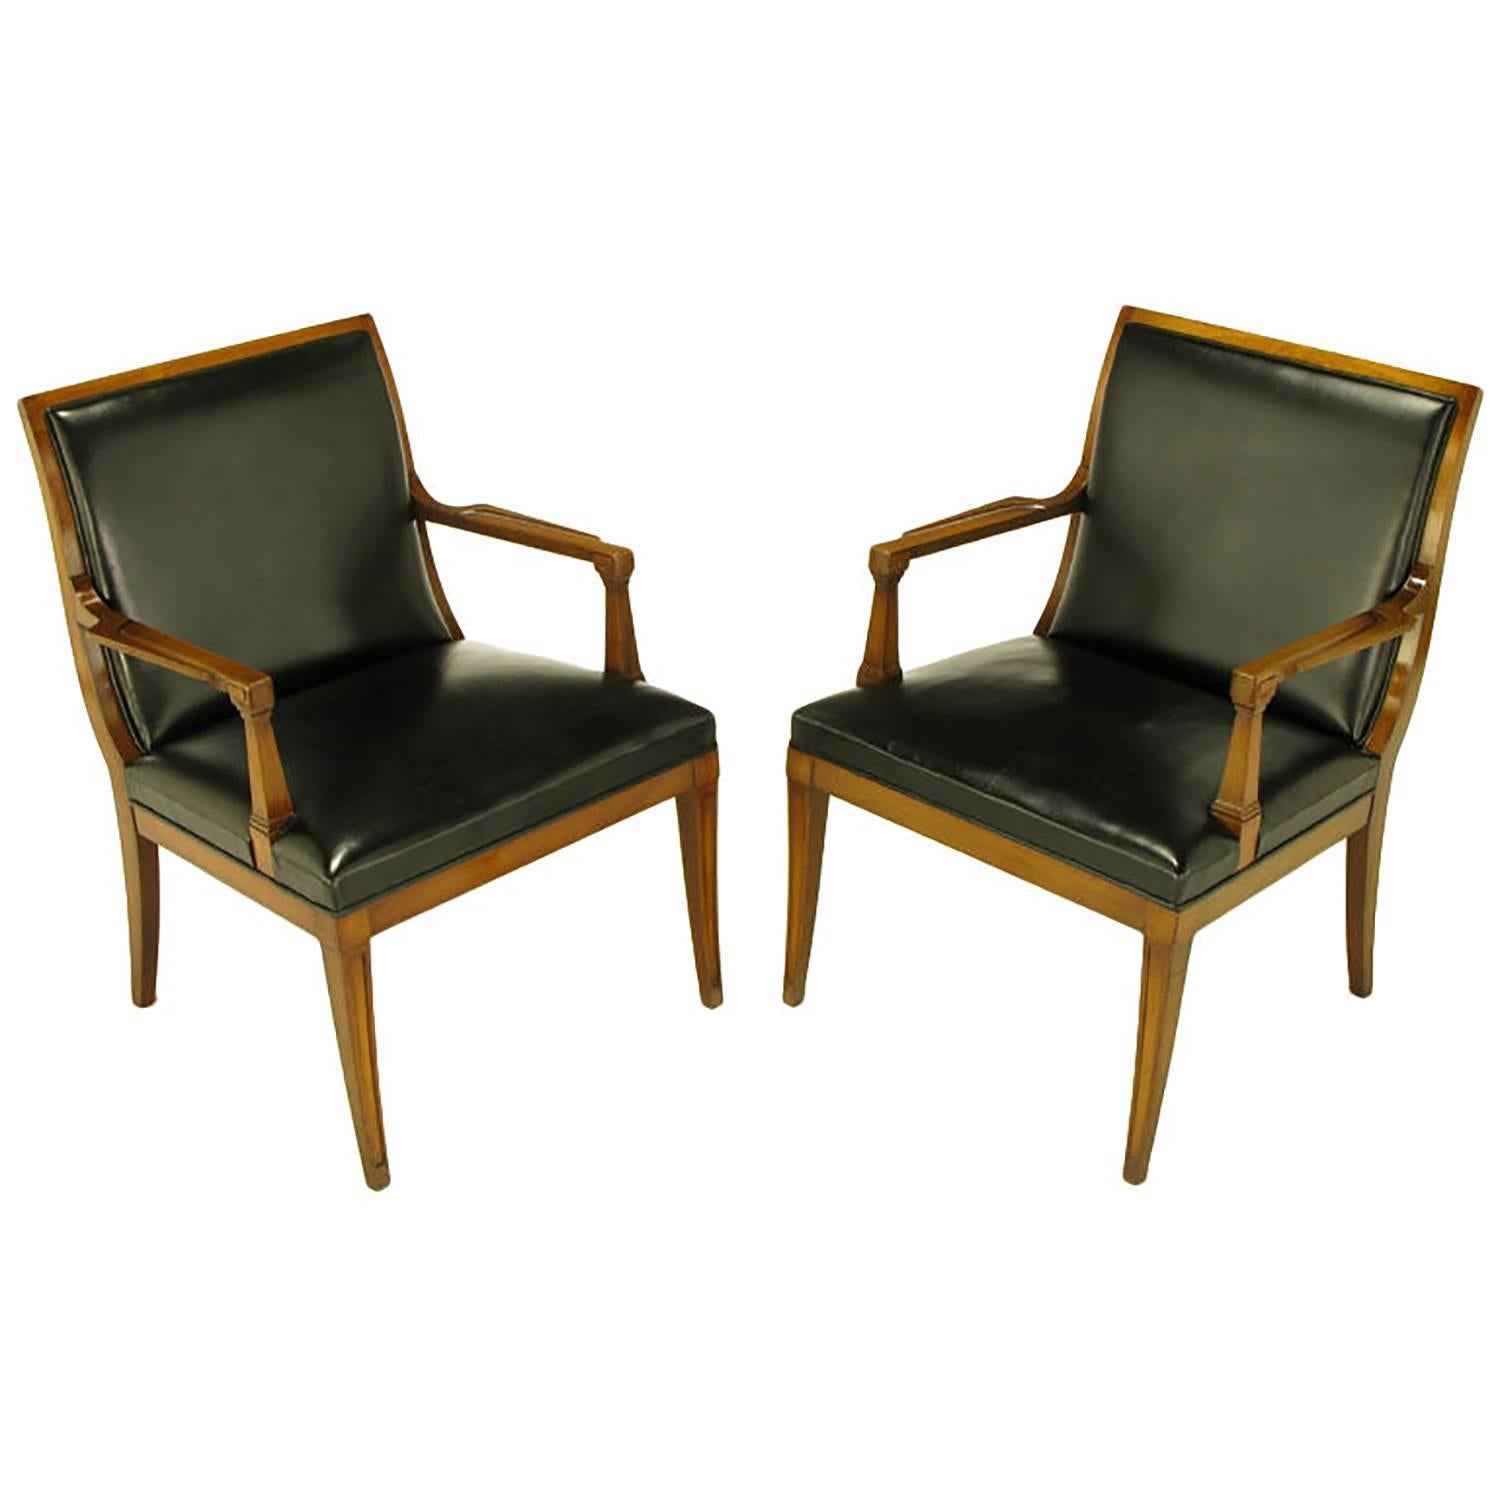 Pair of Stow Davis Italian Regency carved walnut and black leather arm chairs. Curvaceous back and saber legs with recessed panels, block corners and sculpted arms. Black leather seat and back with back panel. From the period when Bert England was